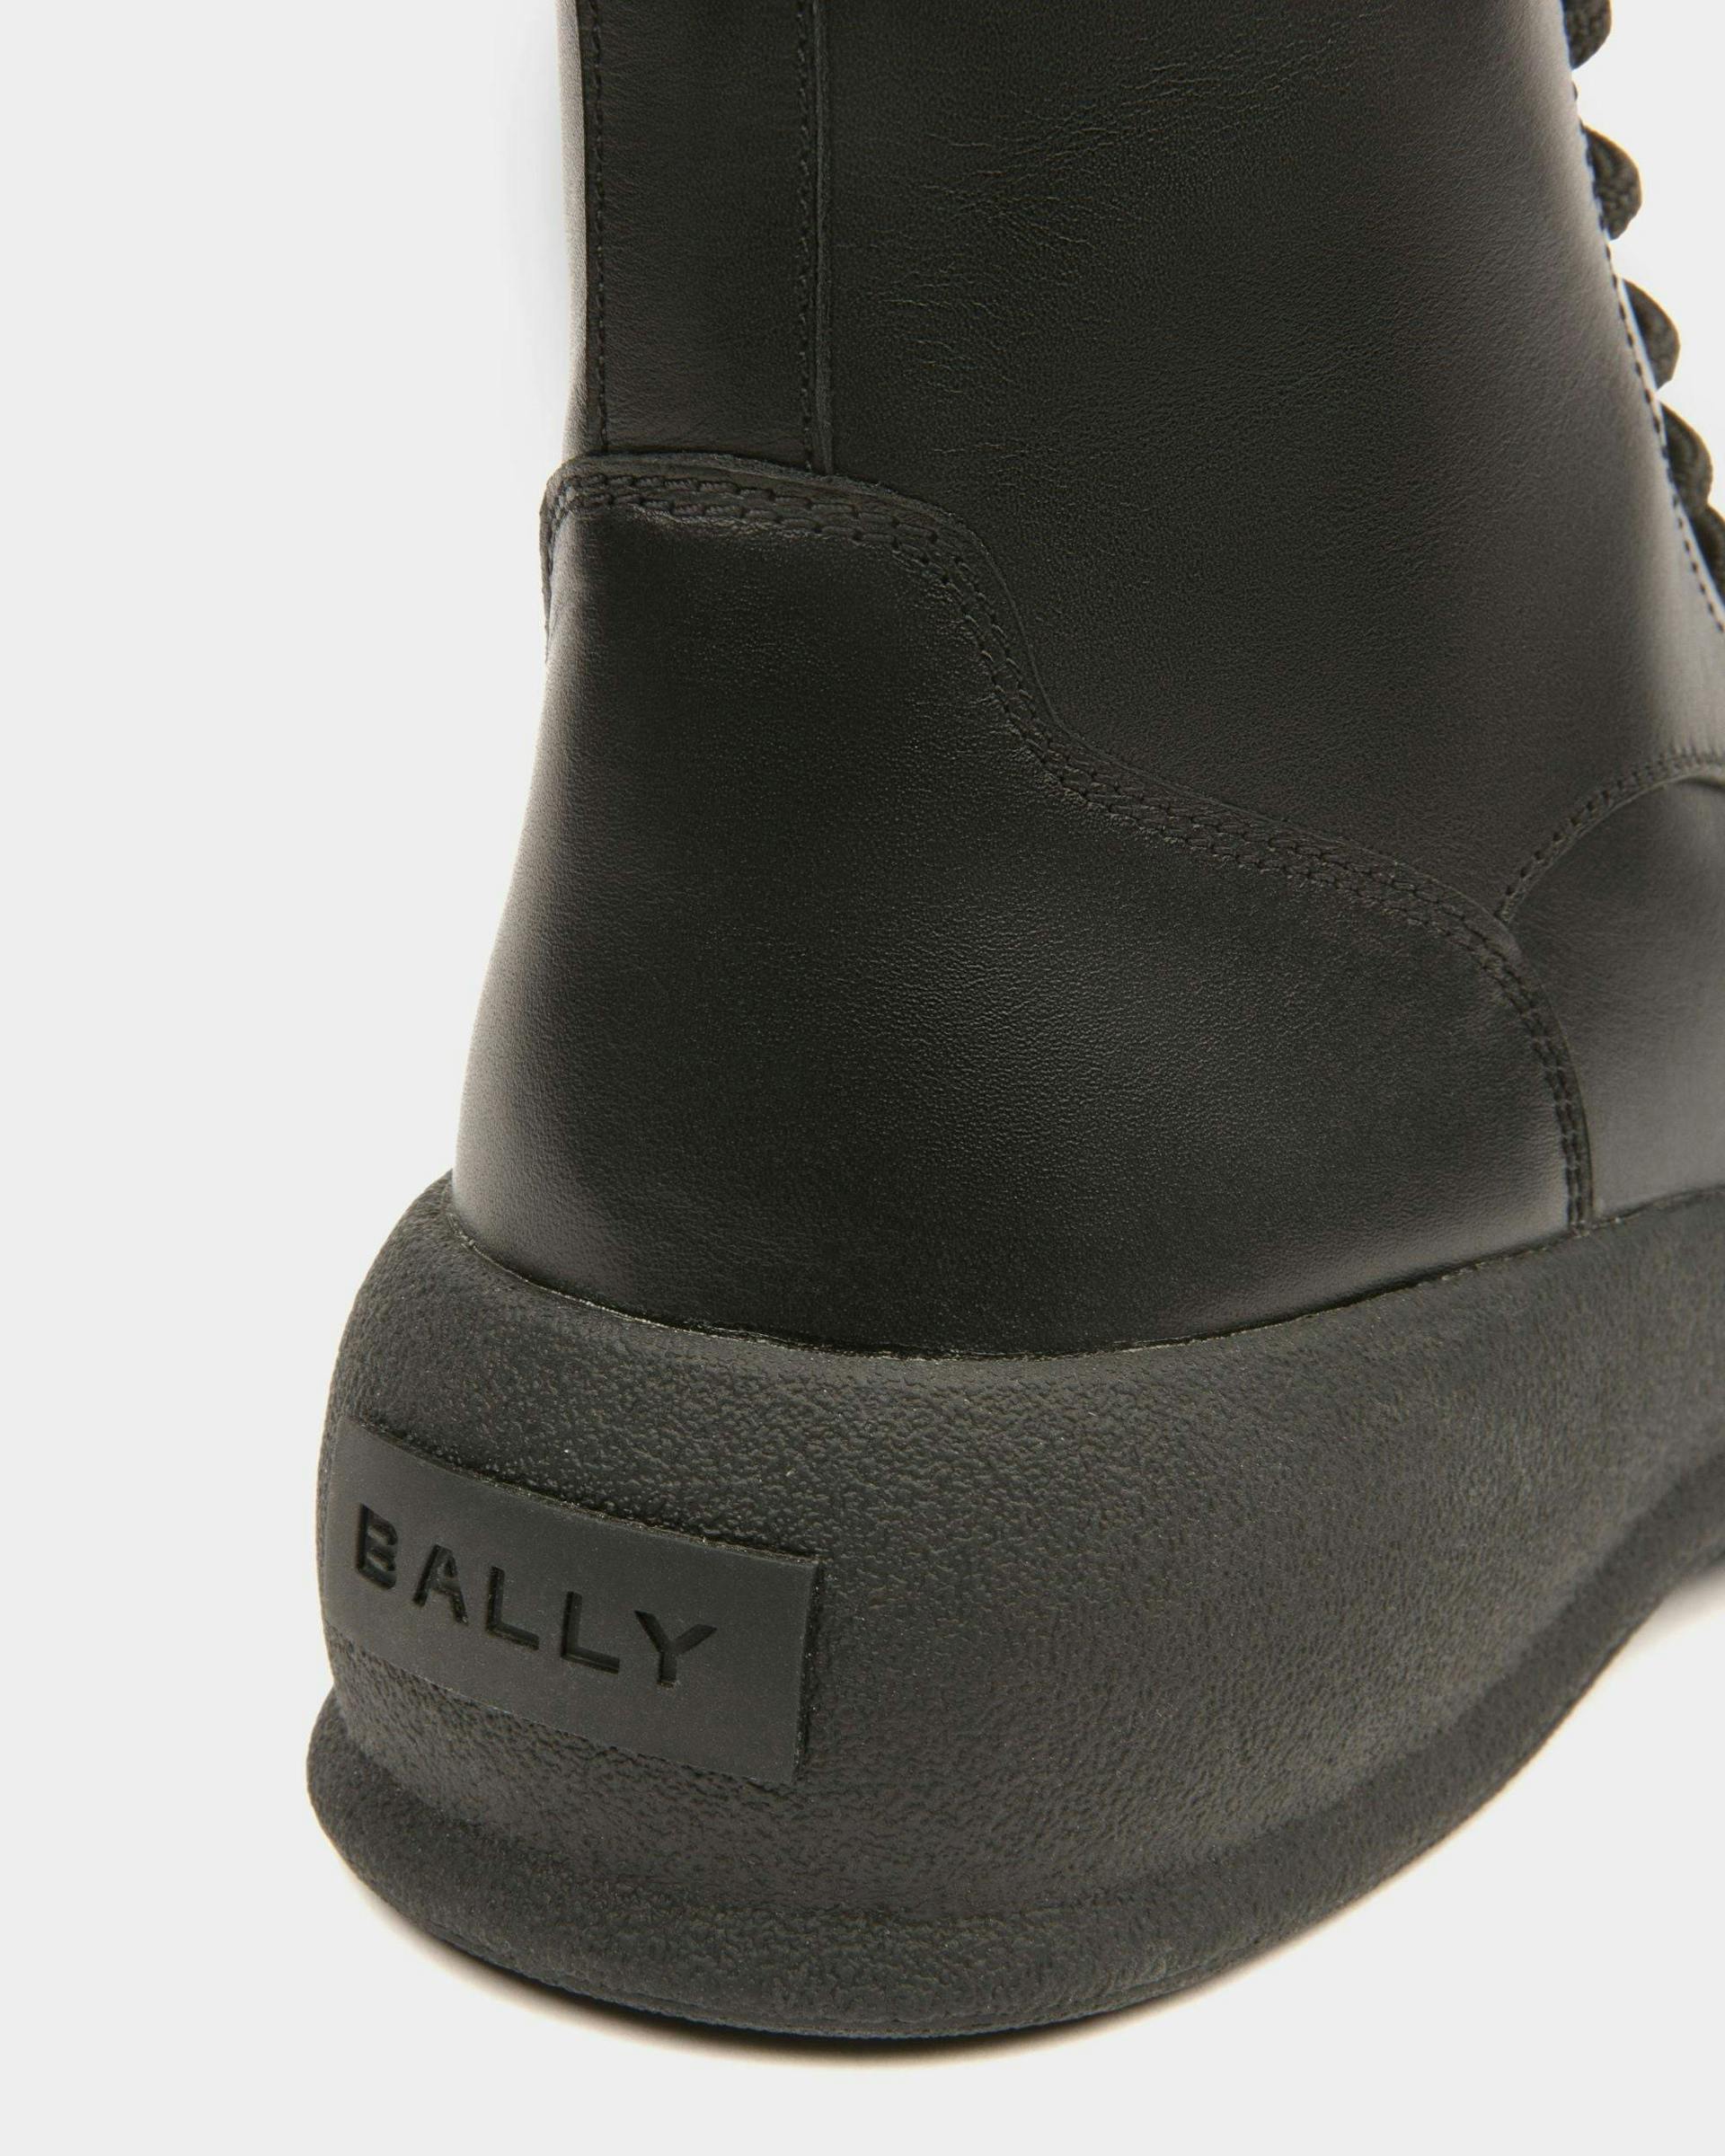 Women's Frei Boots In Black Leather | Bally | Still Life Detail